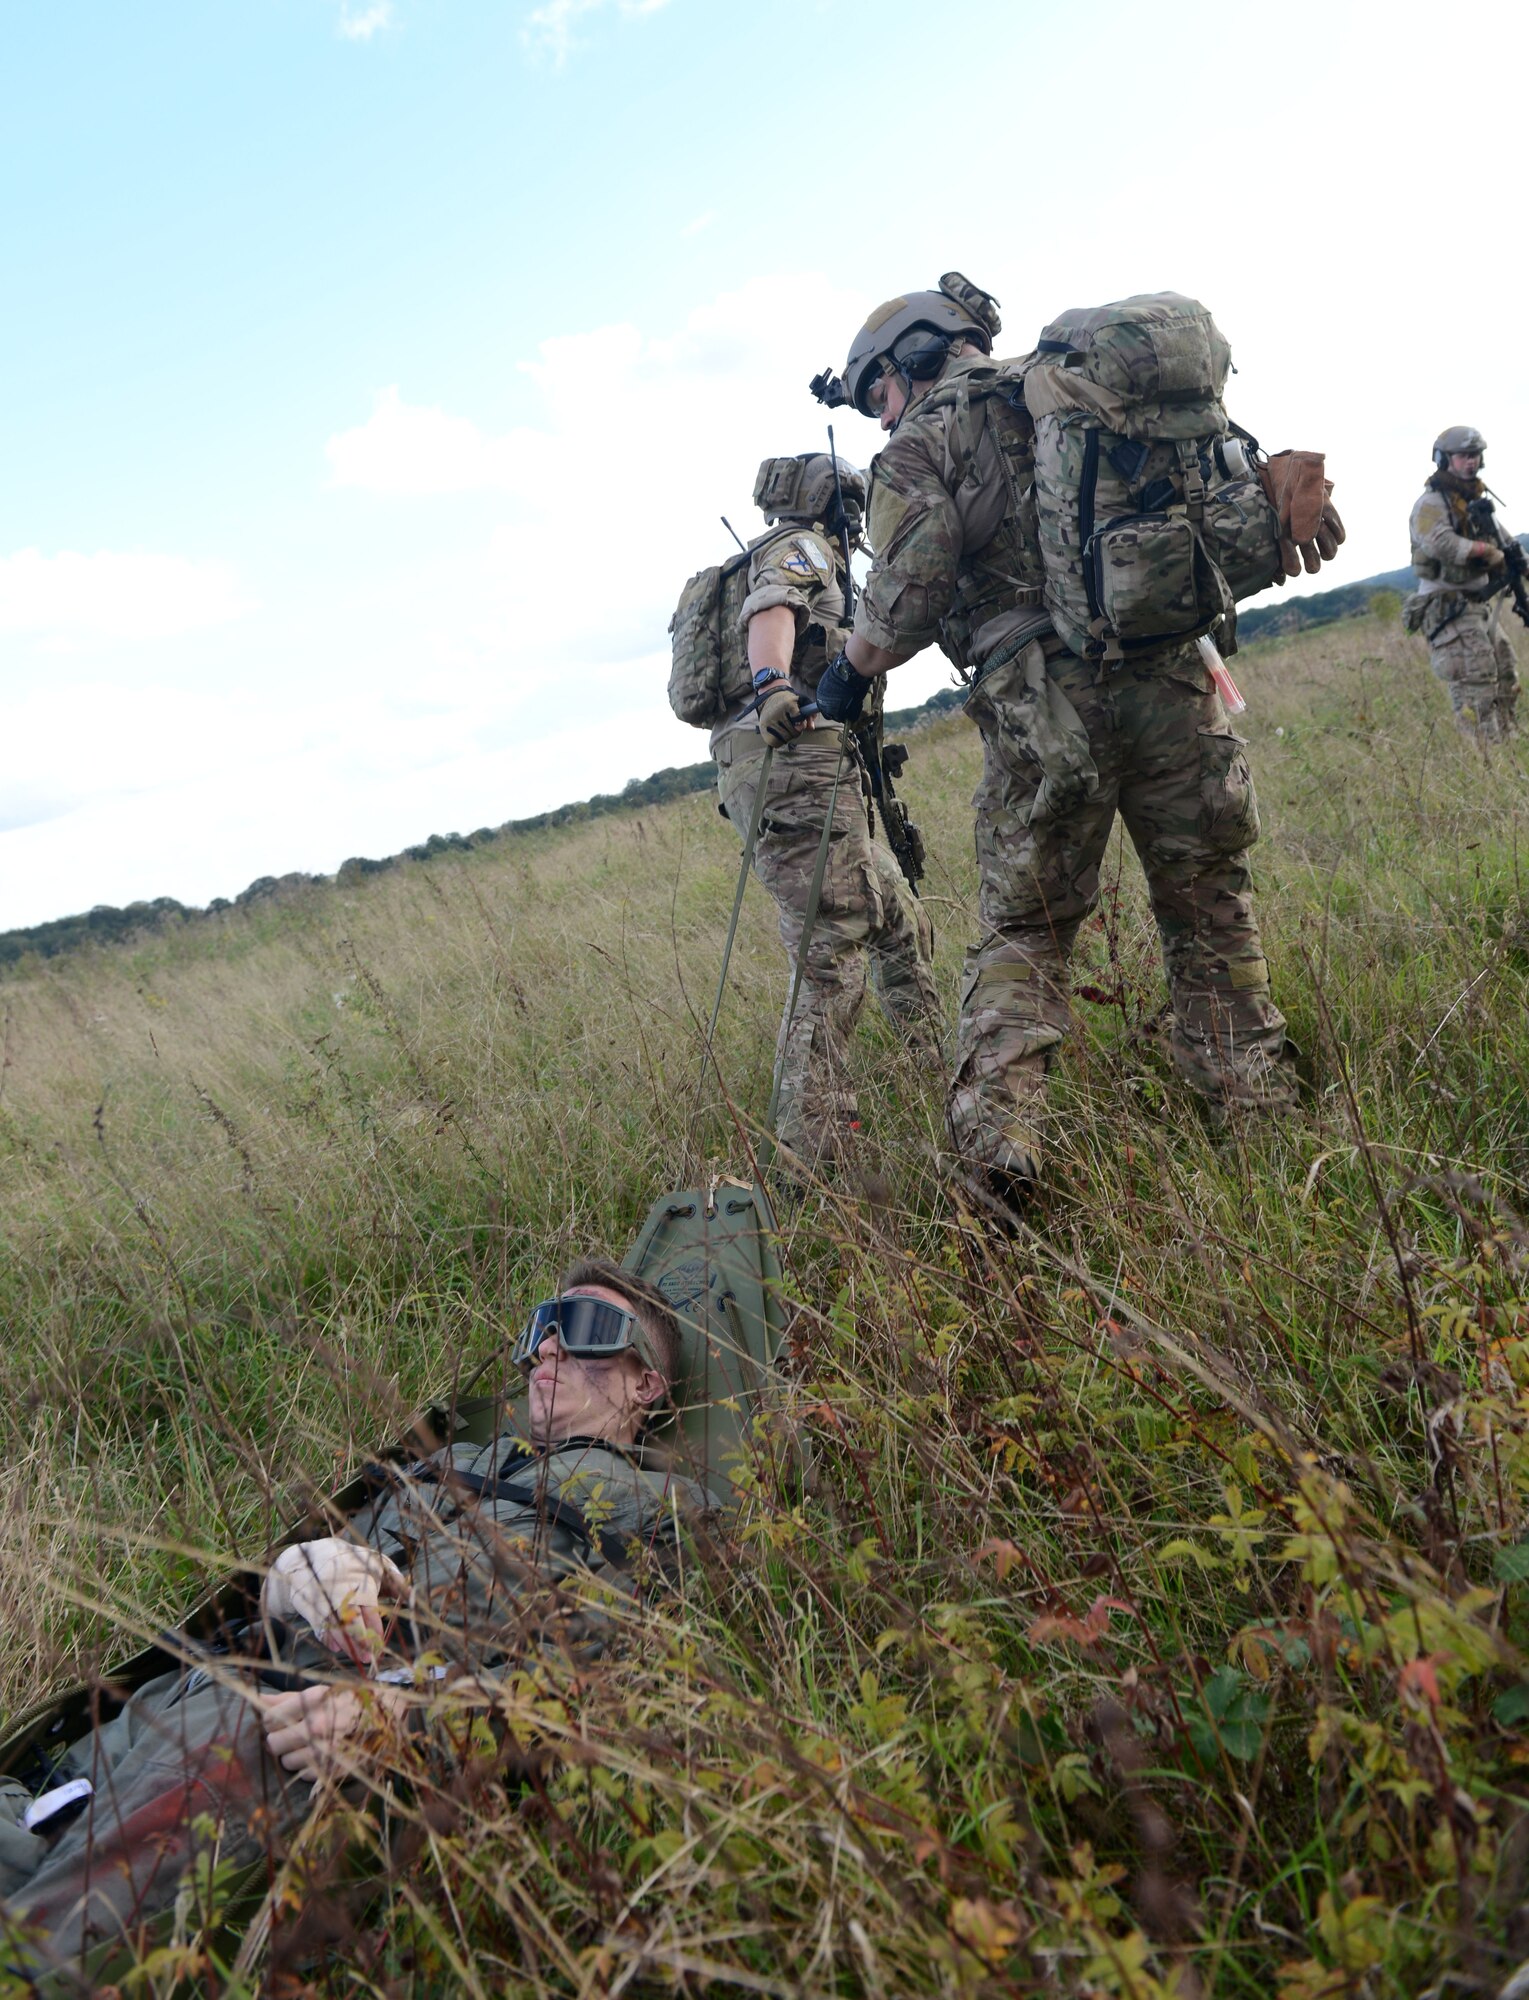 A U.S. Air Force combat controller, center, and a U.S. Air Force pararecueman, right, pull a fake victim from a simulated village under attack during a training exercise Oct. 7, 2014, at Stanford Training Area near Thetford, England. The exercise was designed to familiarize special tactics Airmen with combat scenarios preparing them for the possibilities of real-world incidents. (U.S. Air Force photo/Senior Airman Kate Maurer/Released)